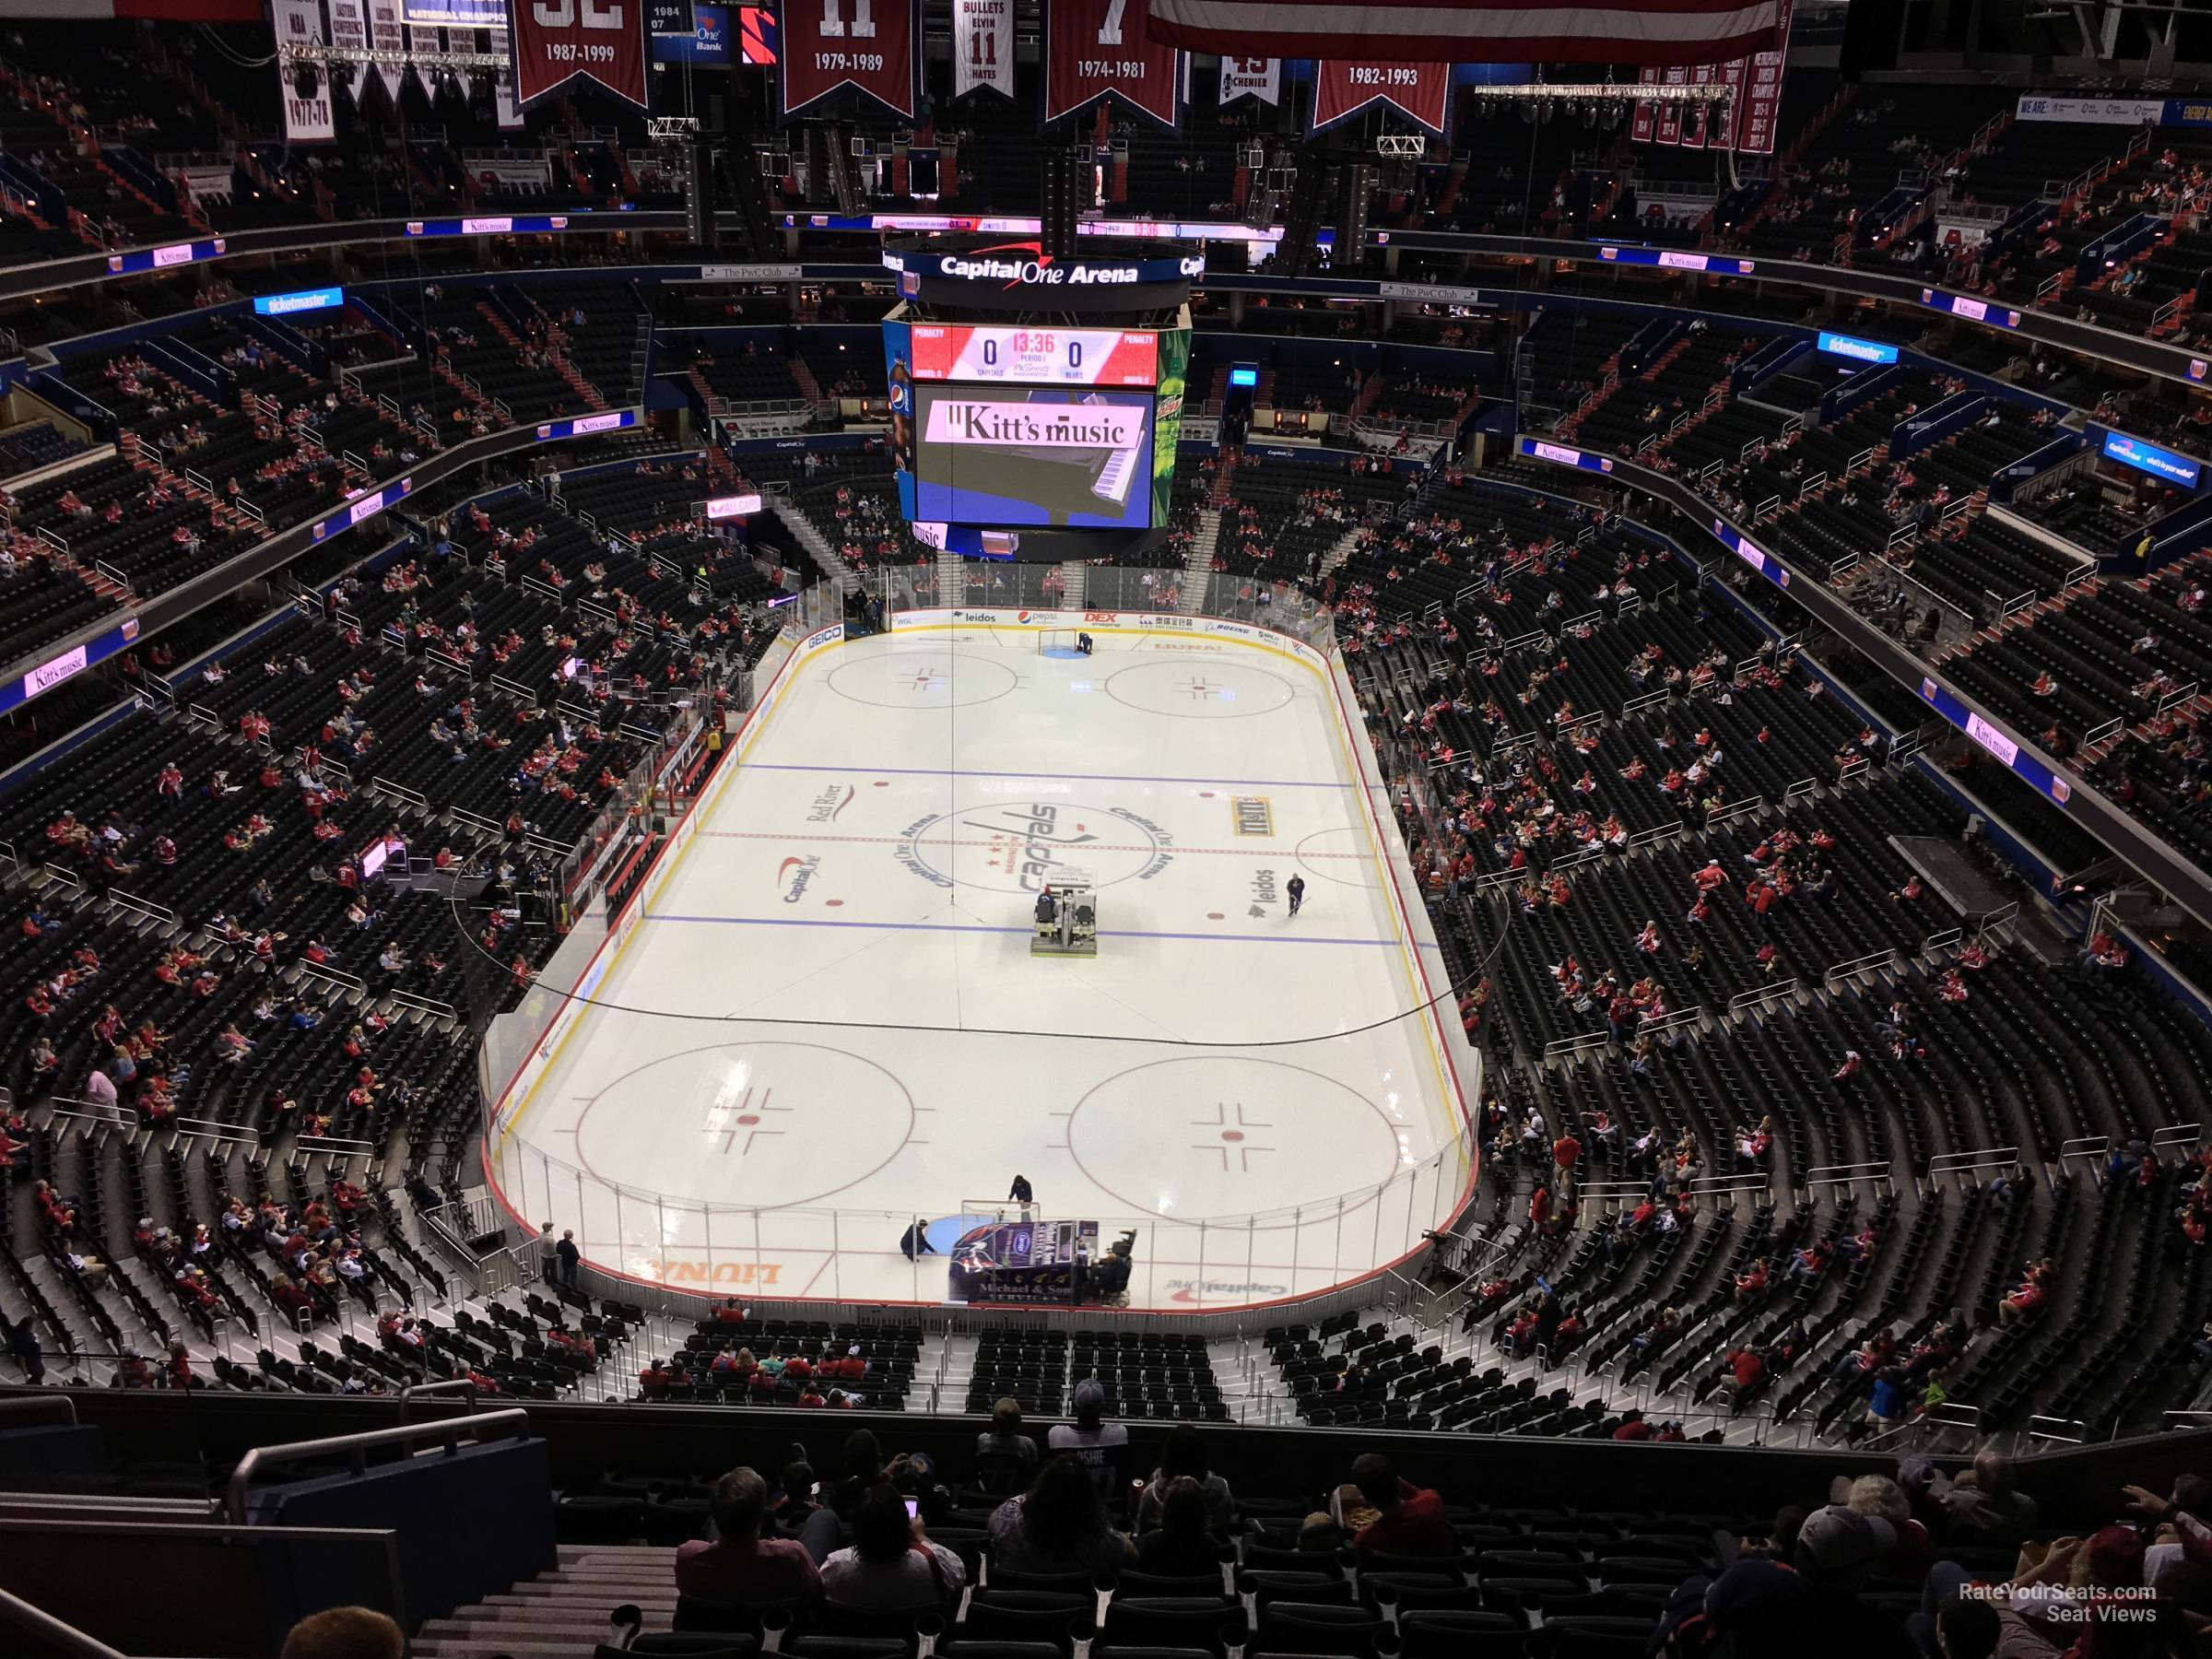 section 409, row m seat view  for hockey - capital one arena